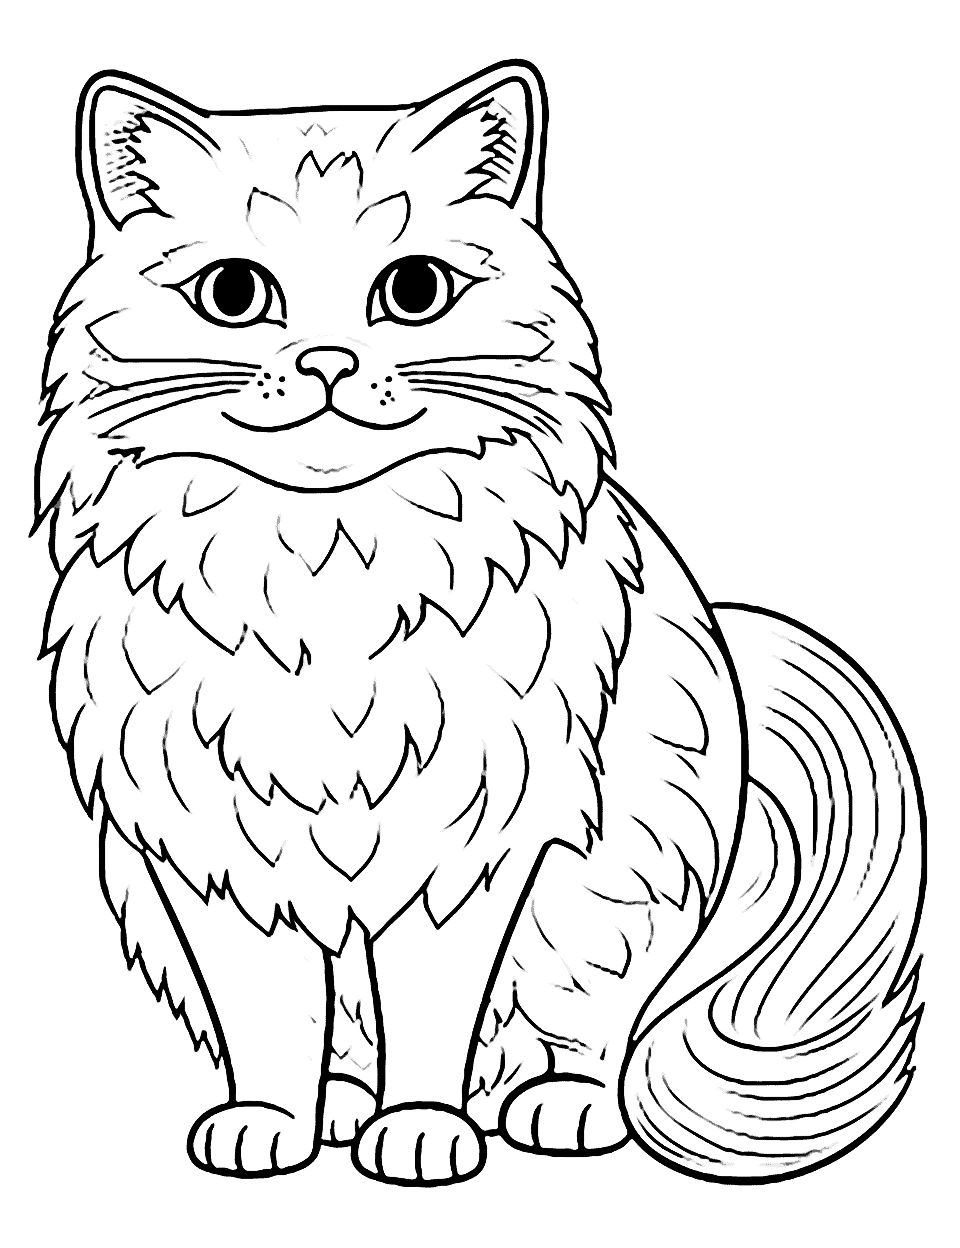 Detailed Persian Cat Coloring Page - A coloring sheet of a detailed Persian cat with its distinct long coat and round face.